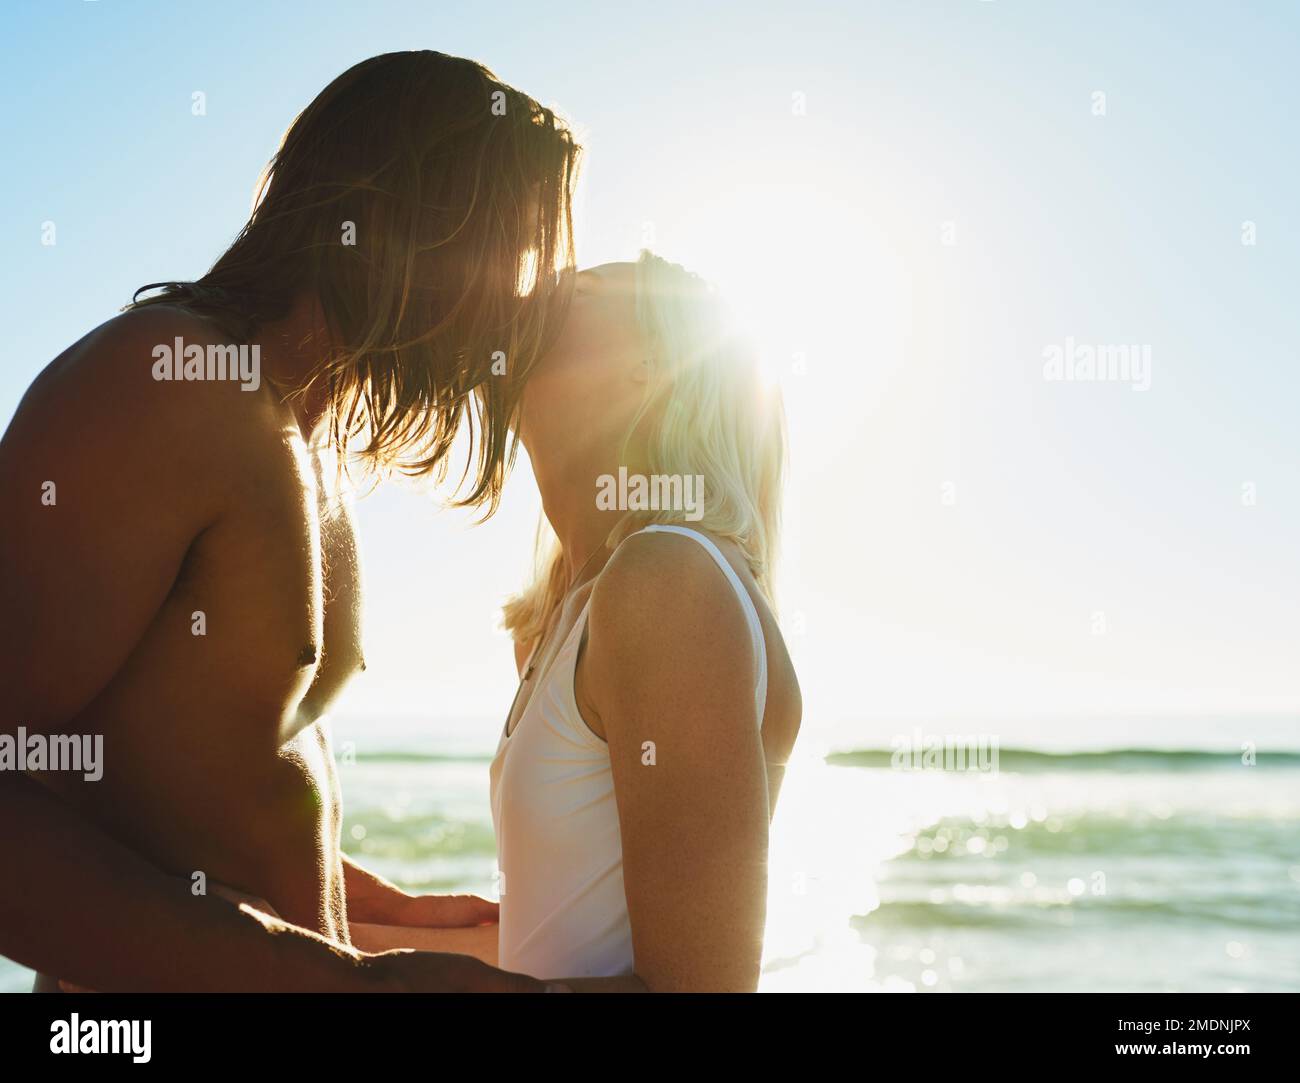 Theyve never felt closer. an affectionate young couple kissing each other at the beach. Stock Photo